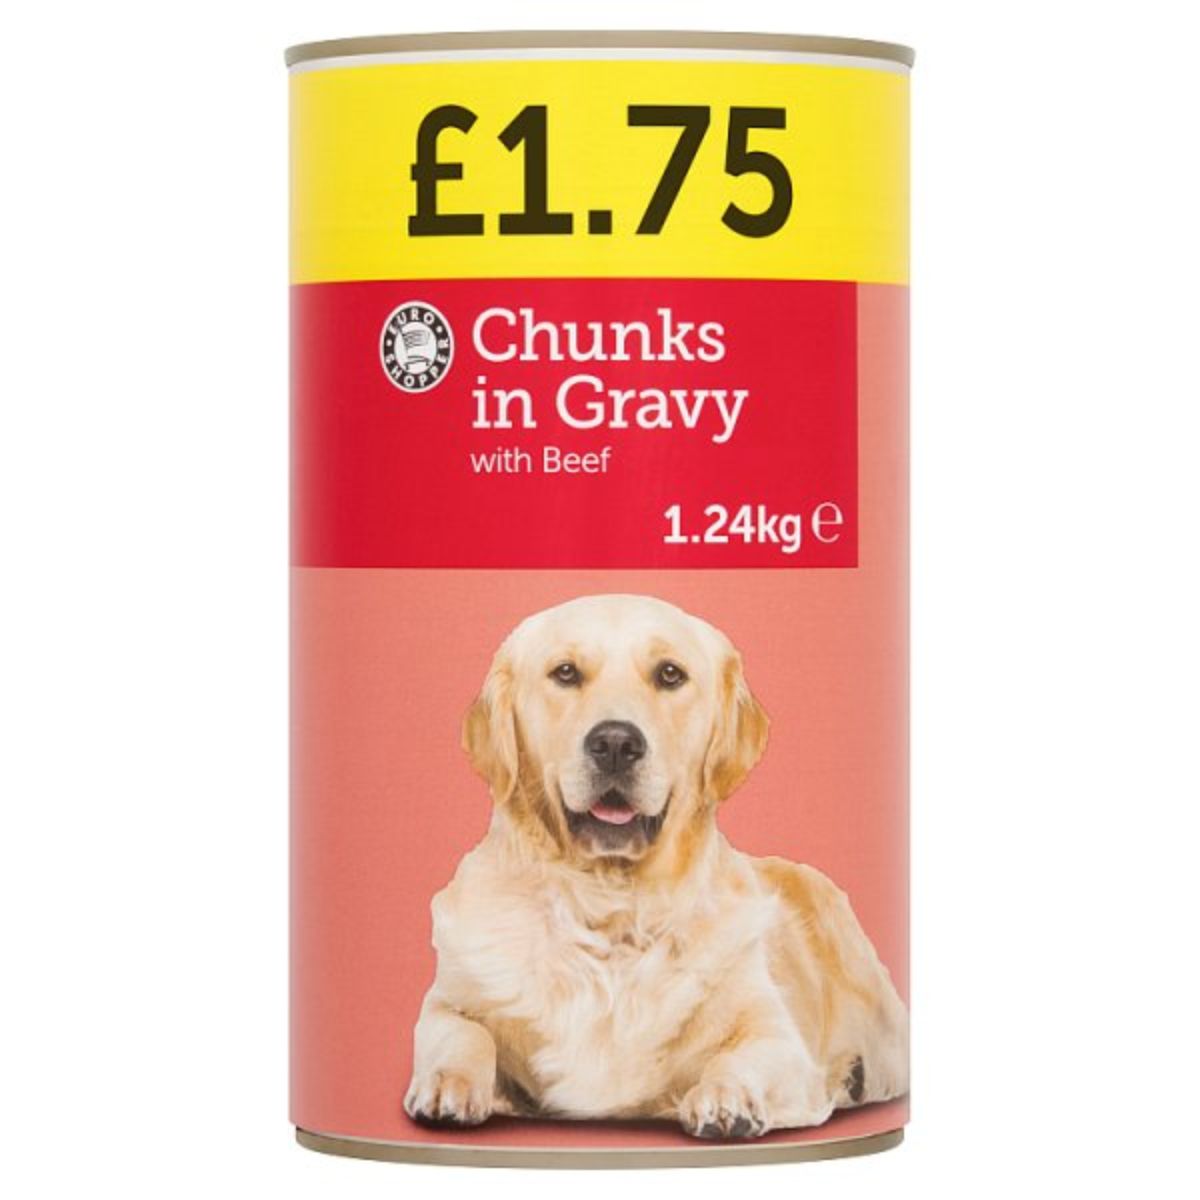 Euro Shopper - Chunks in Gravy with Beef - 1.24kg dog food.